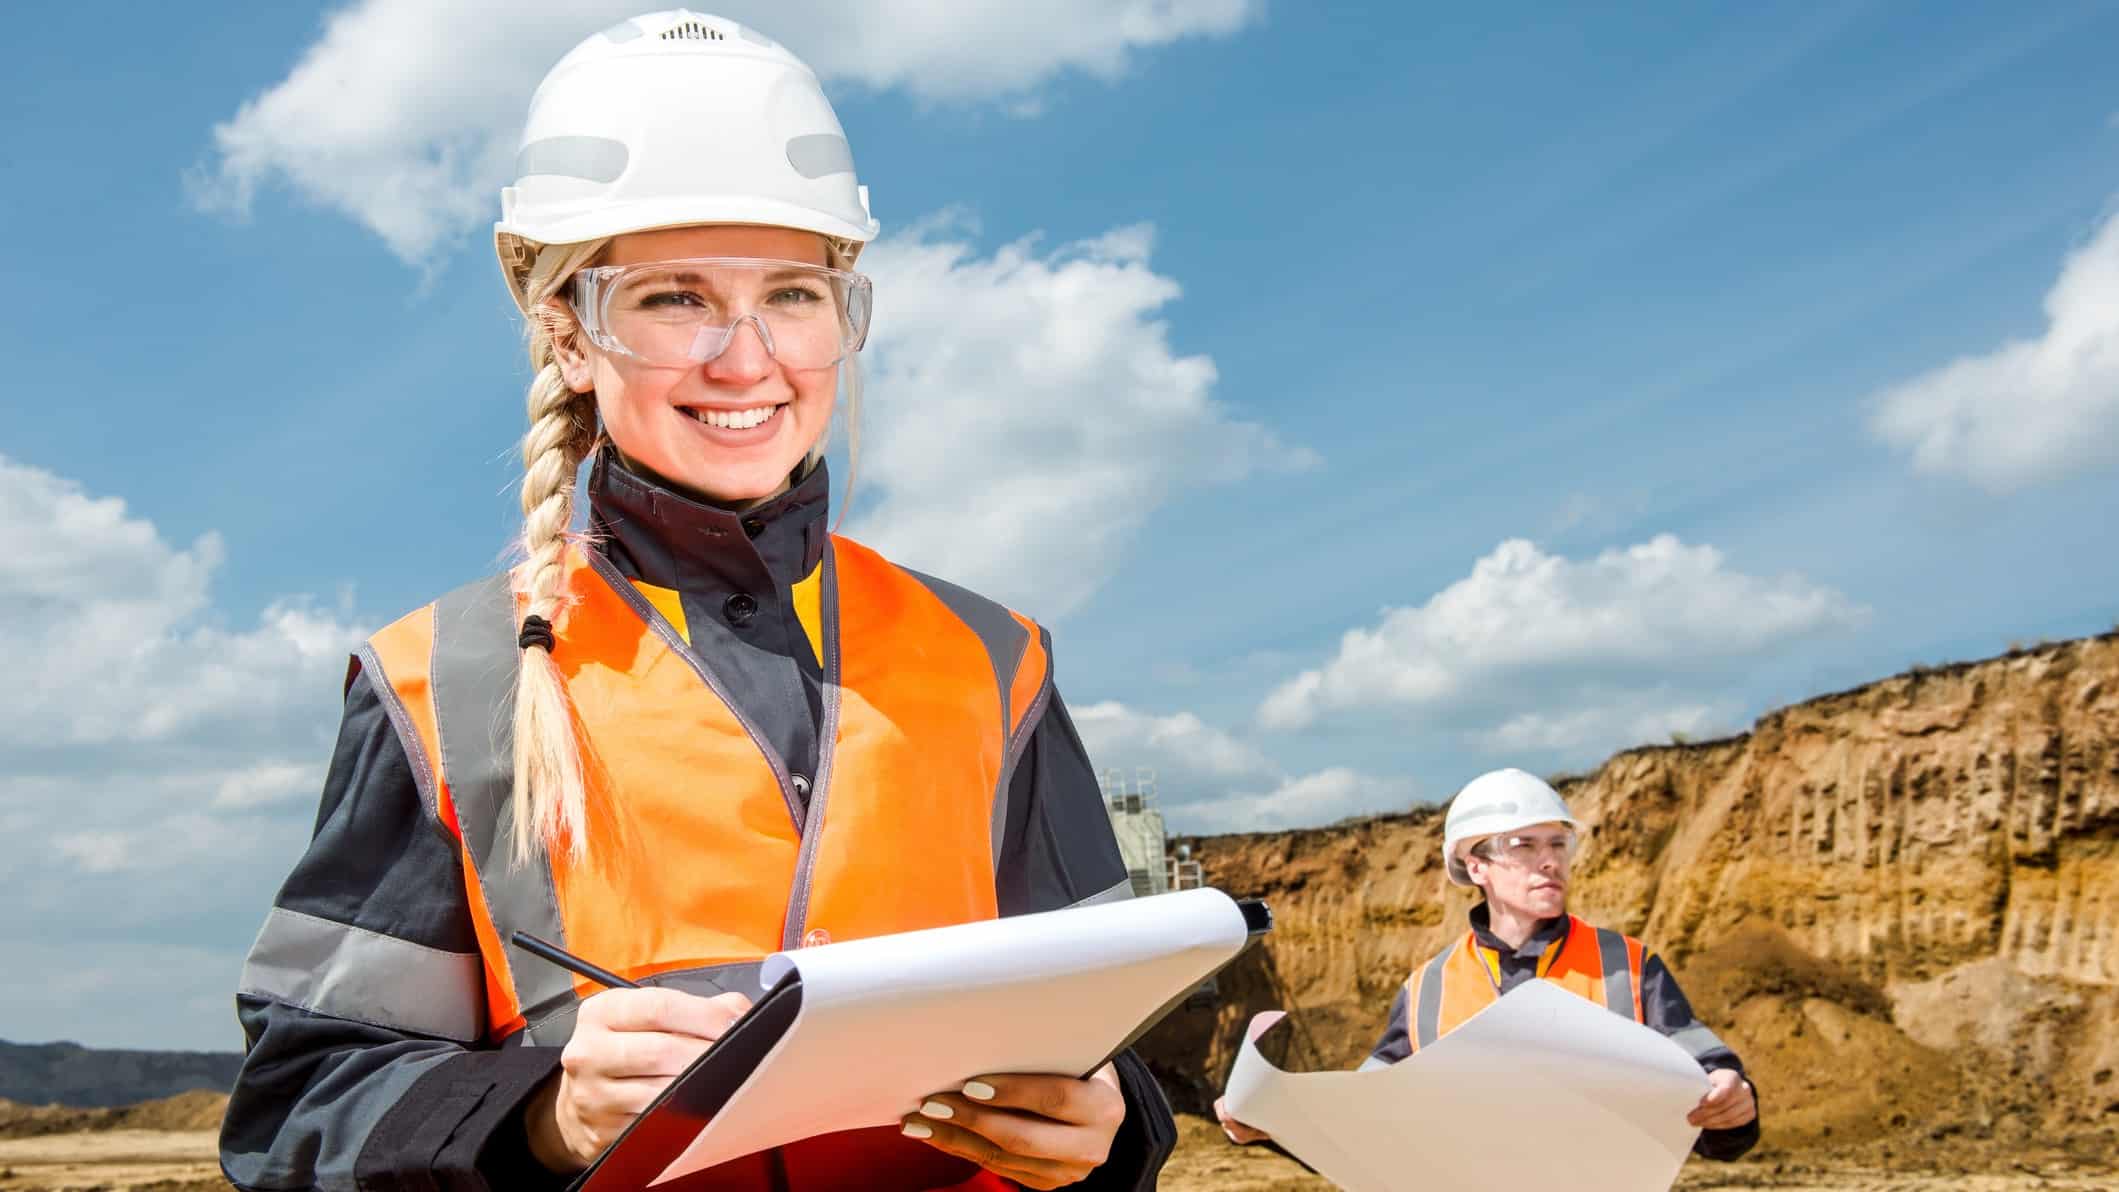 Female miner smiling while inspecting a mine site with another miner.